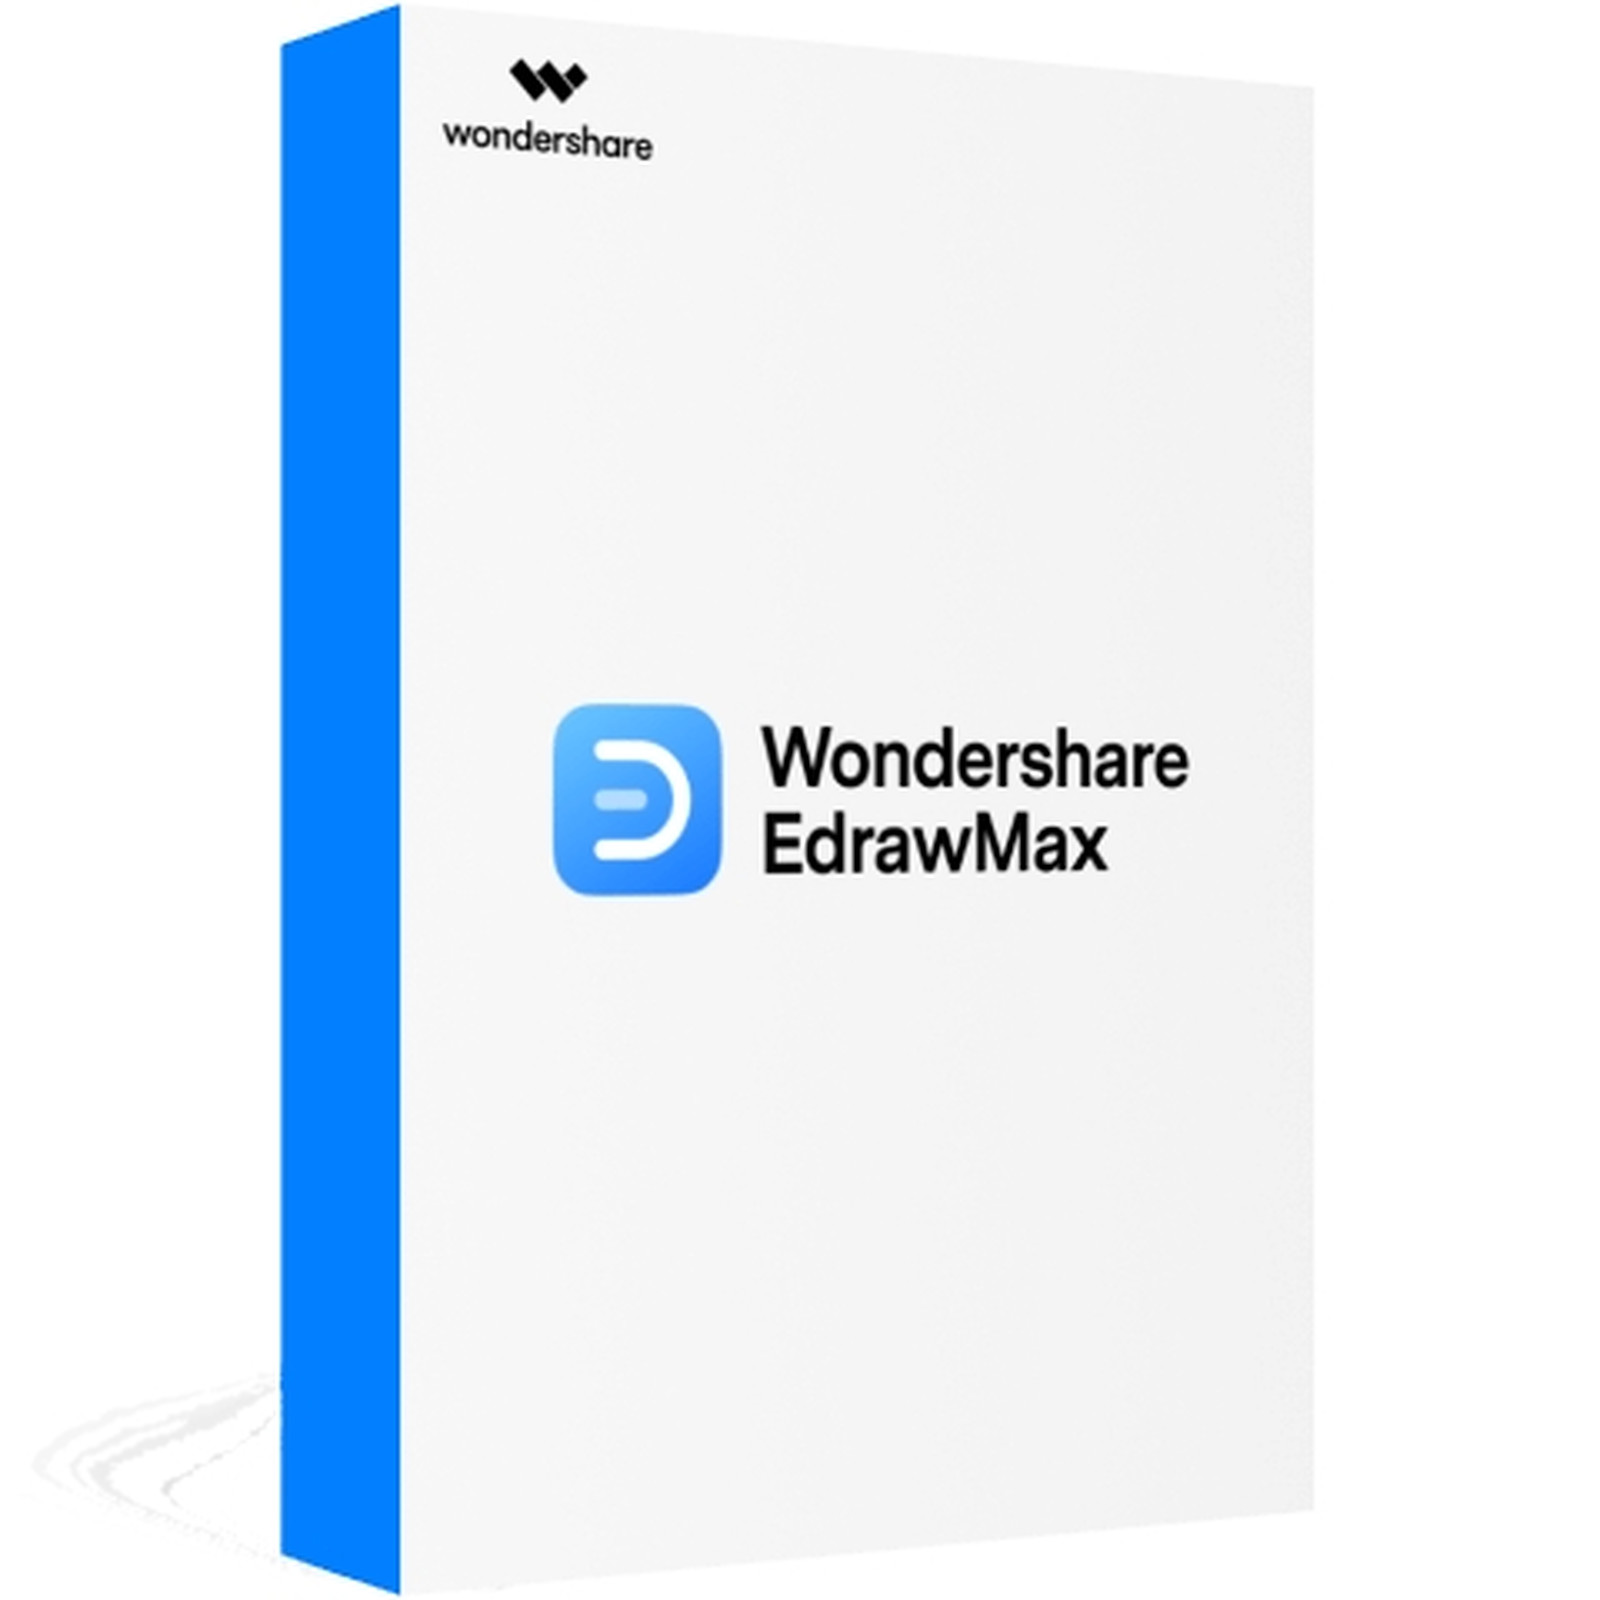 download the last version for ios Wondershare EdrawMax Ultimate 12.6.0.1023